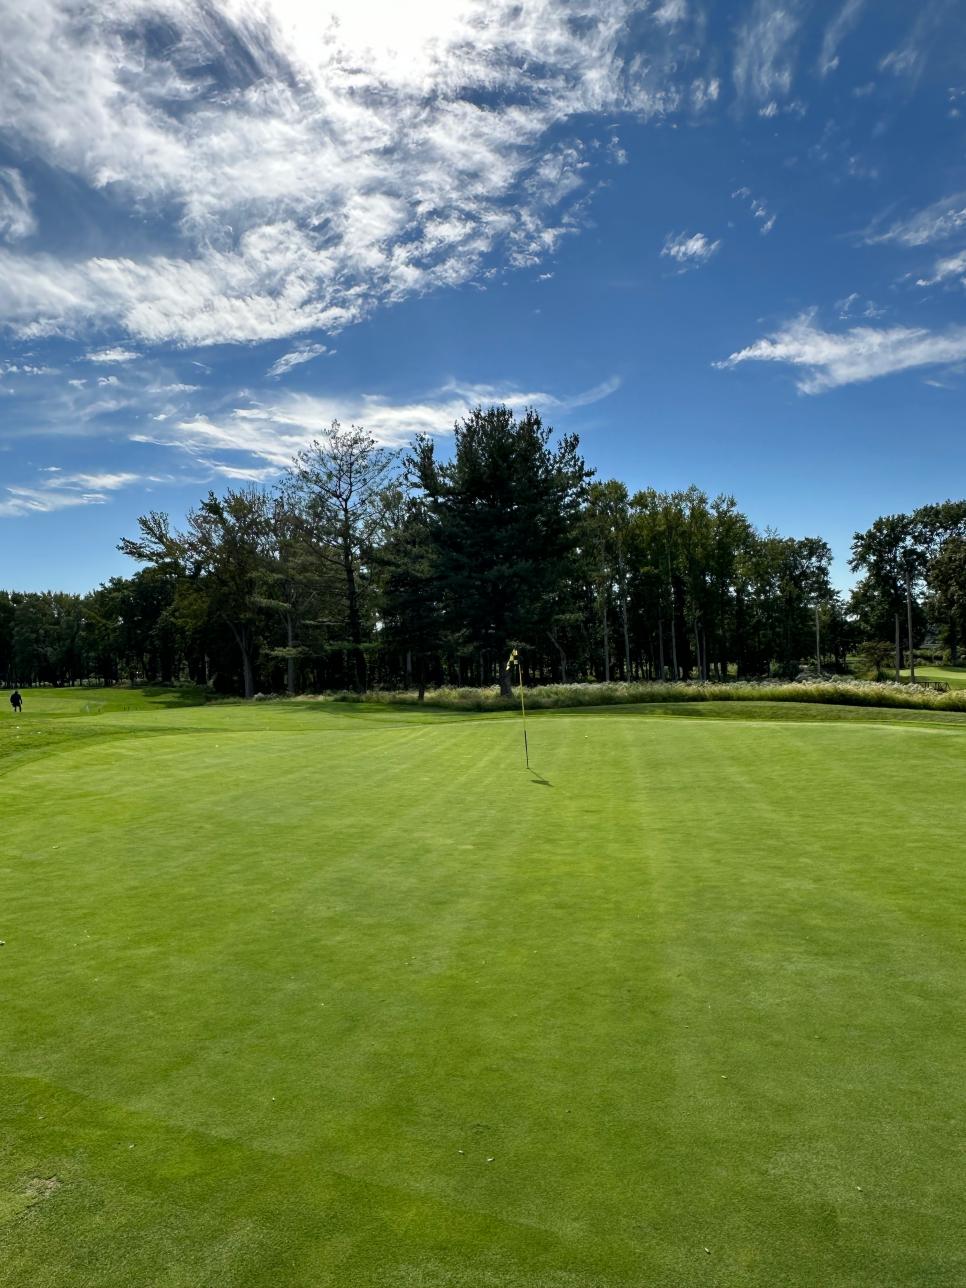 /content/dam/images/golfdigest/fullset/course-photos-for-places-to-play/suneagles-new-jersey-sixteenth-hole-7510.jpg